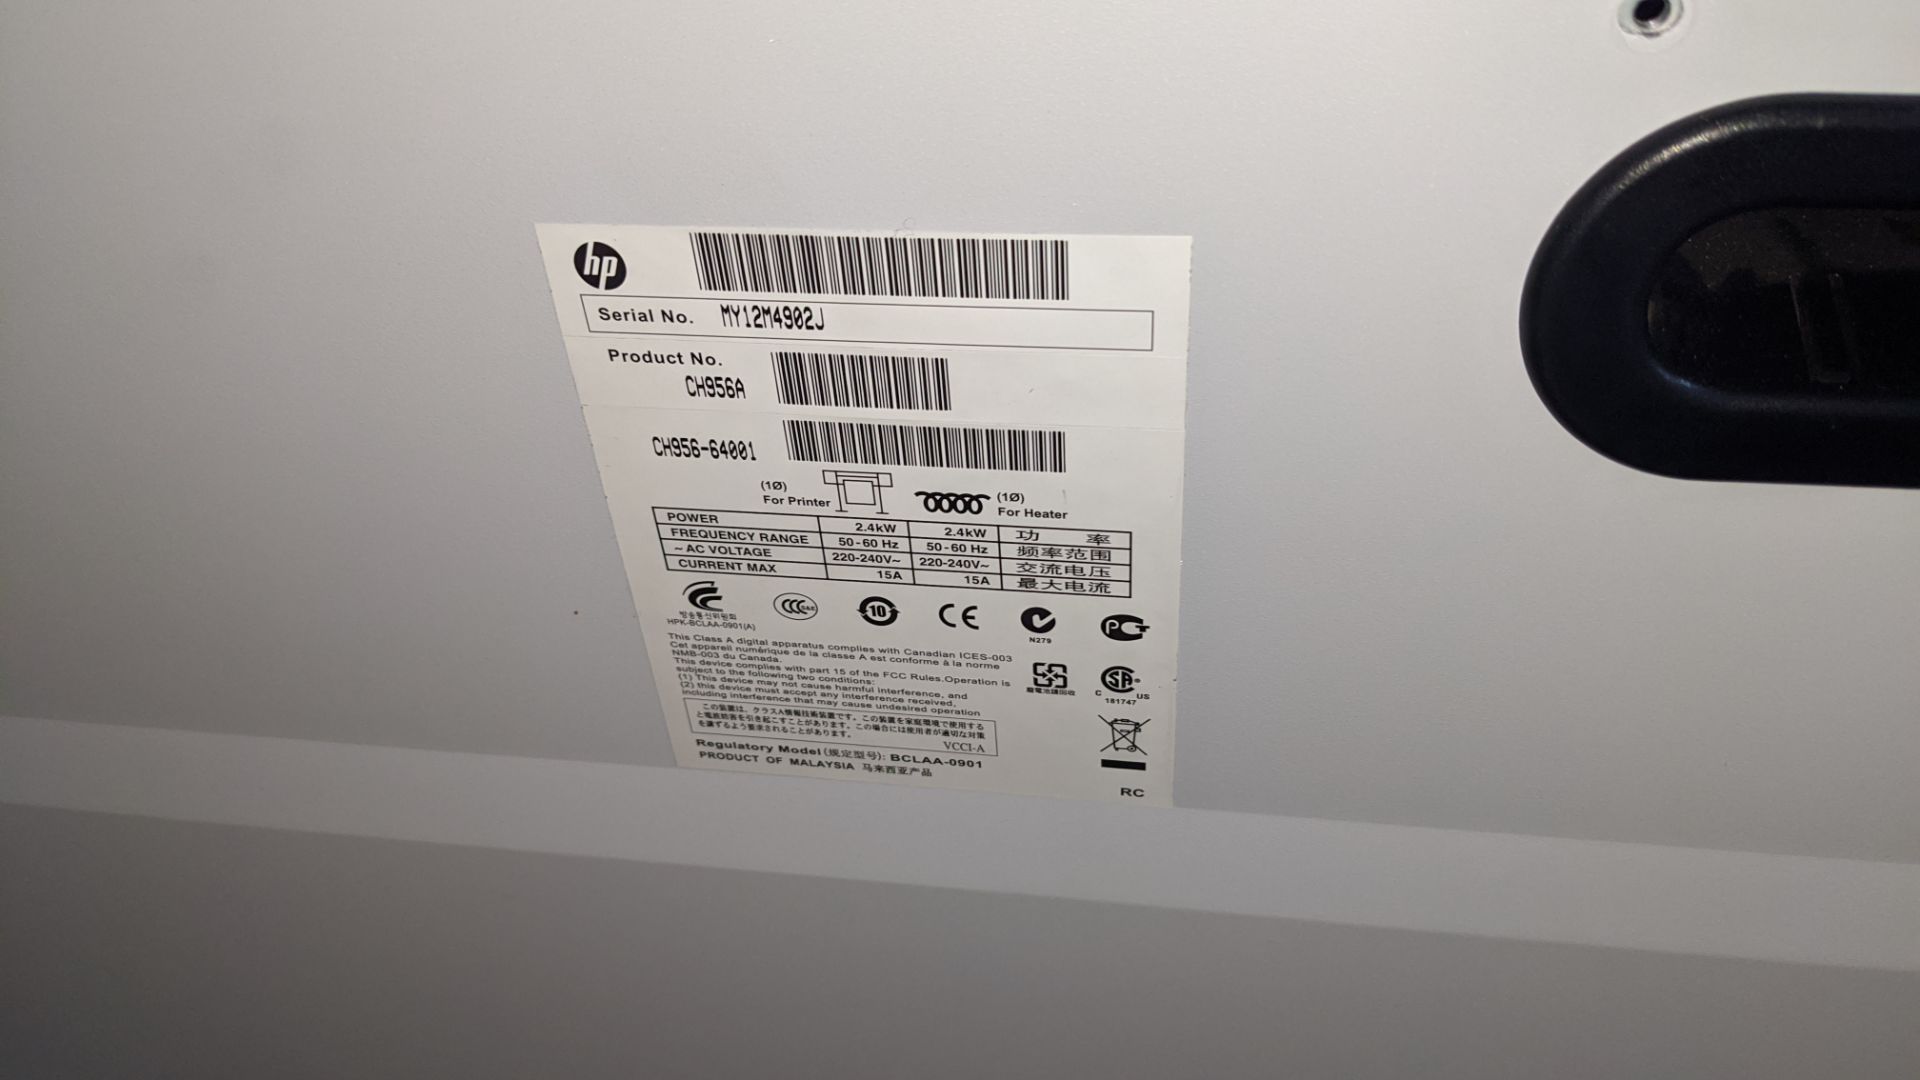 HP DesignJet L25500 wide format printer, serial no. MY12M4902J, product no. CH956A/CH956-64001. NB - Image 3 of 7